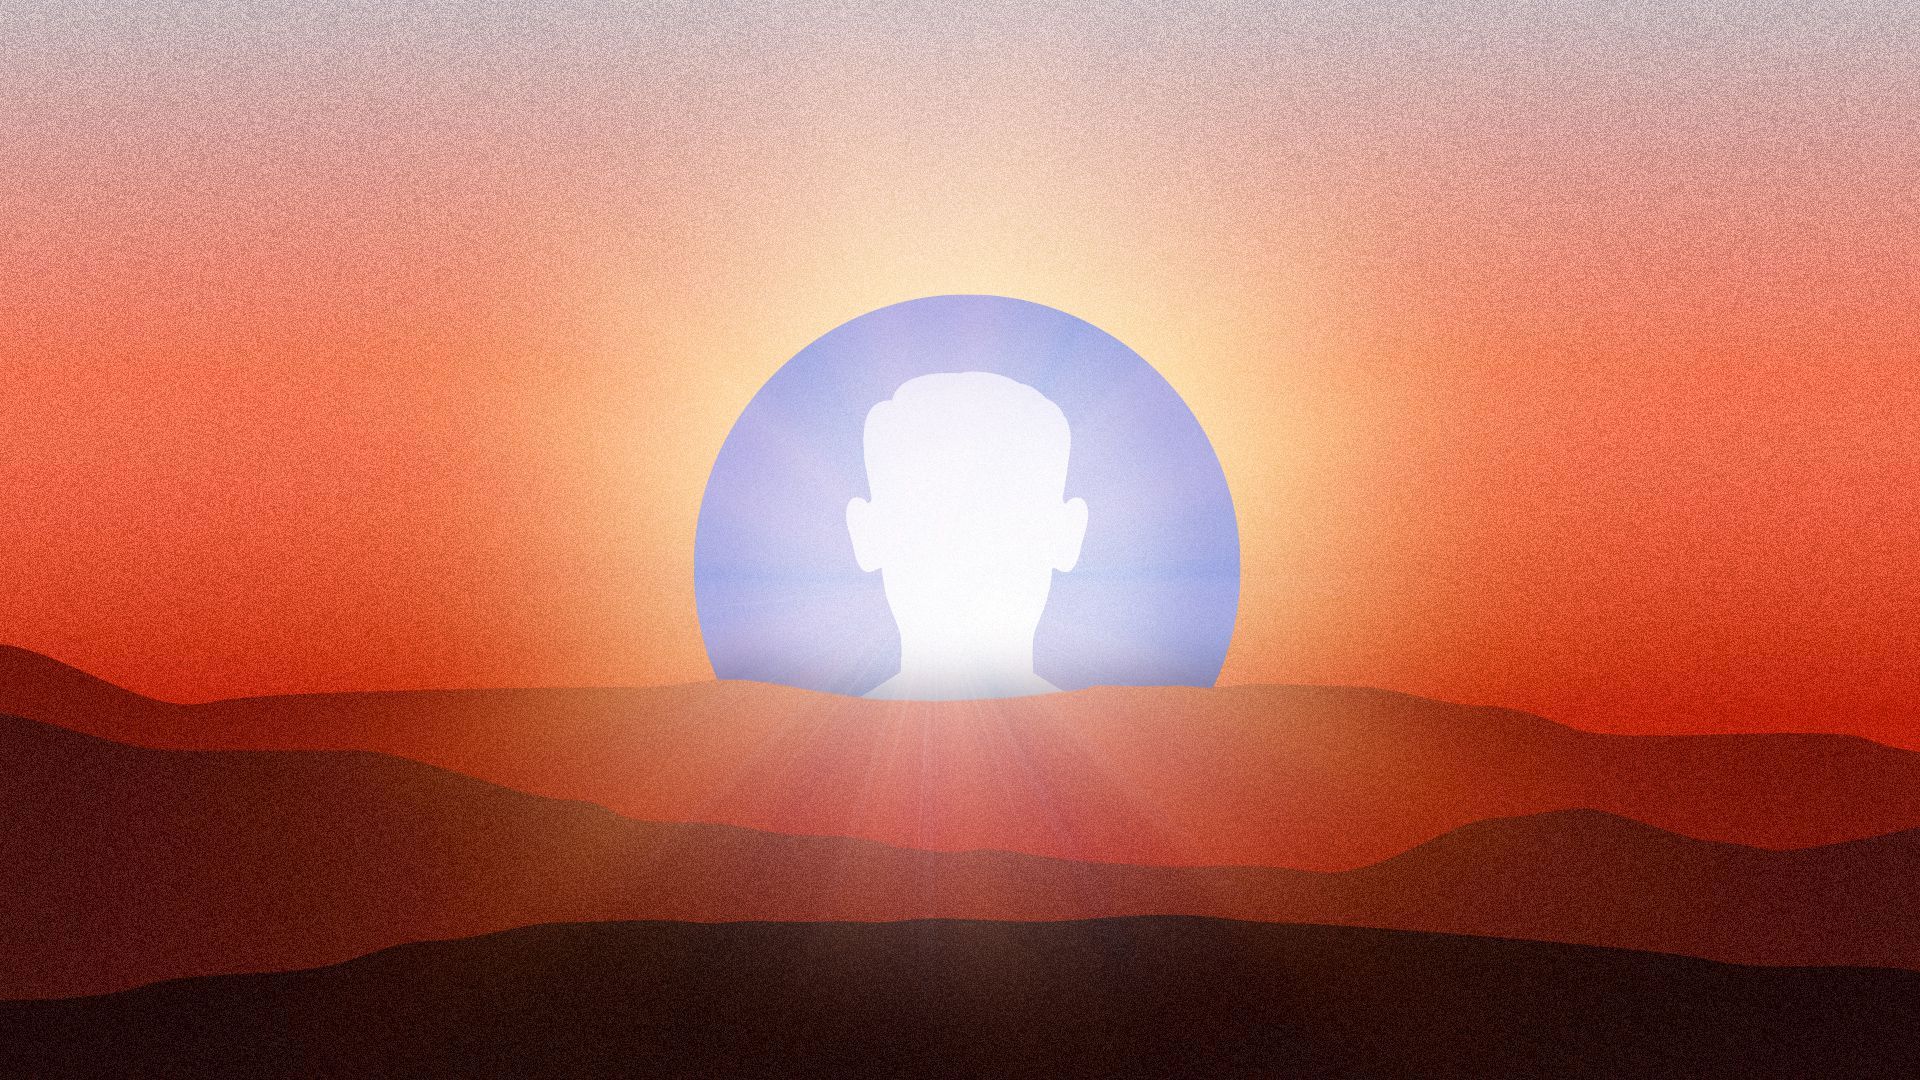 An illustration of Facebook's logo as a sunset over the mountains.